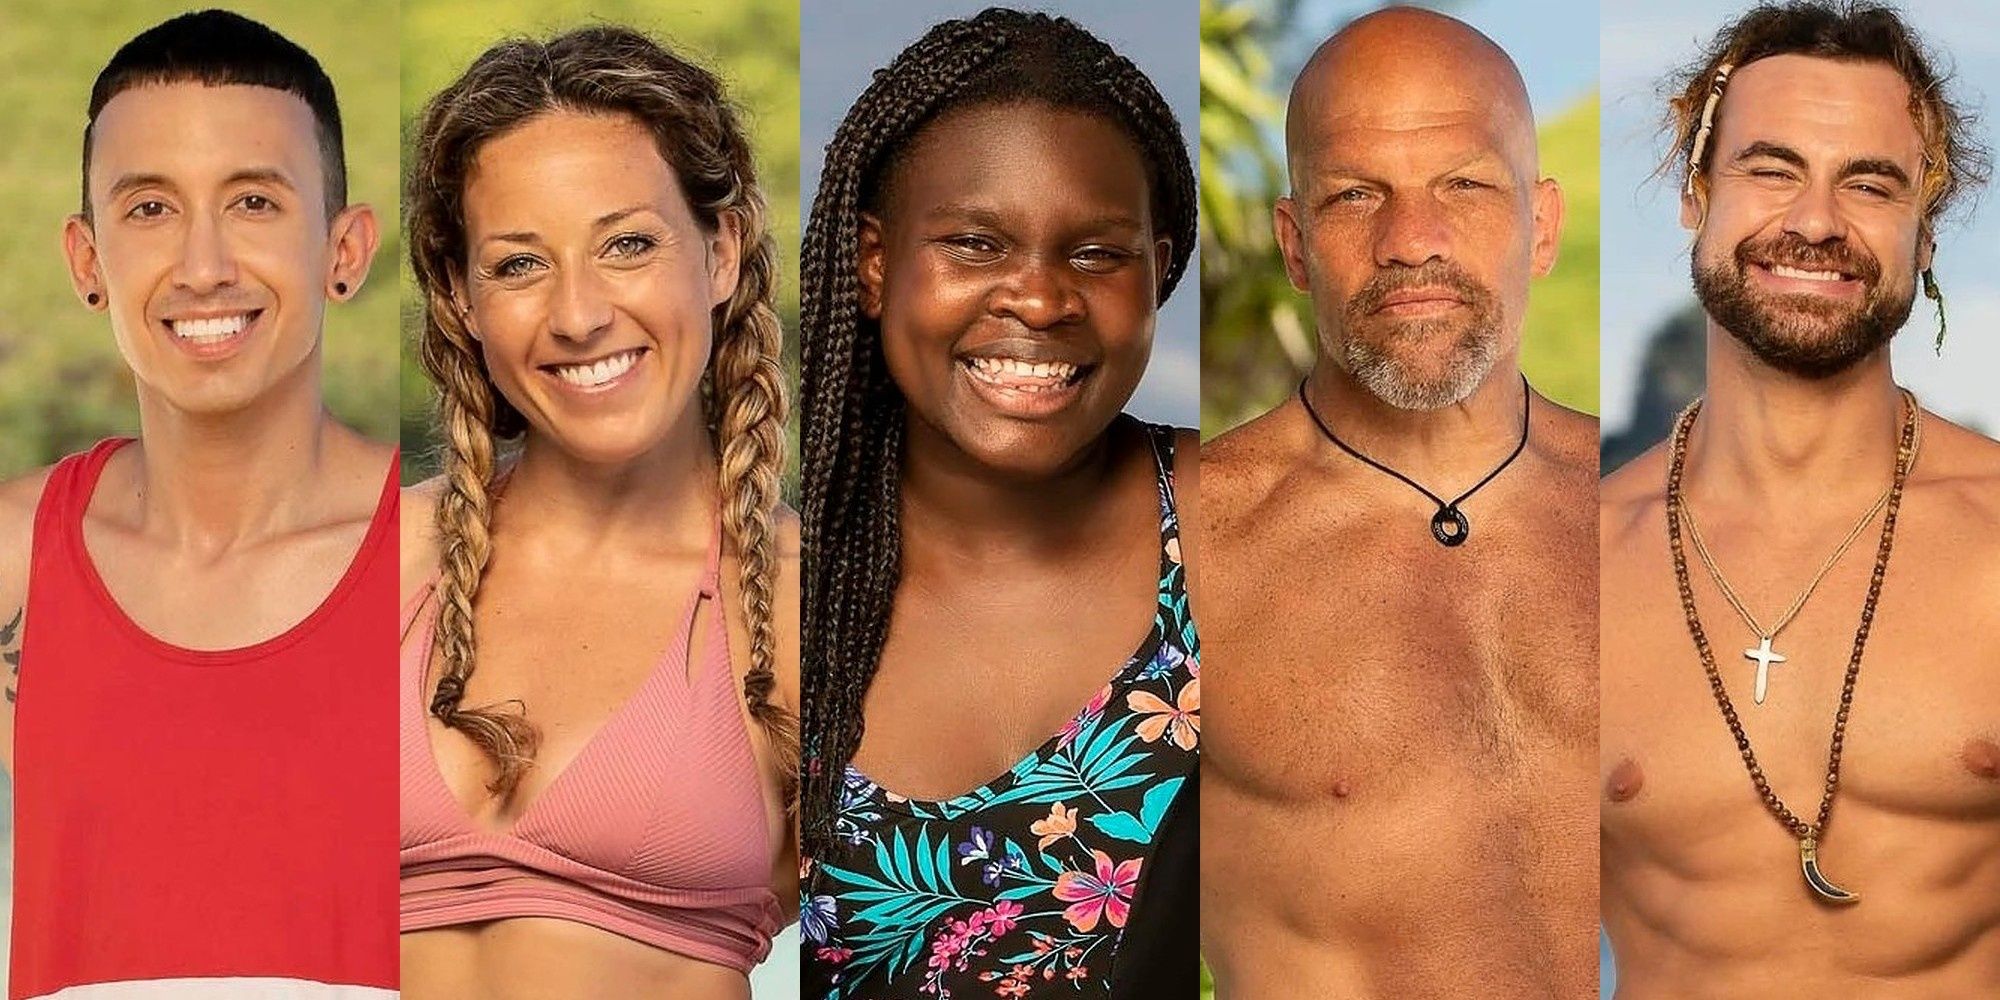 Survivor 42 Ranking The Final Five's Chances To Win